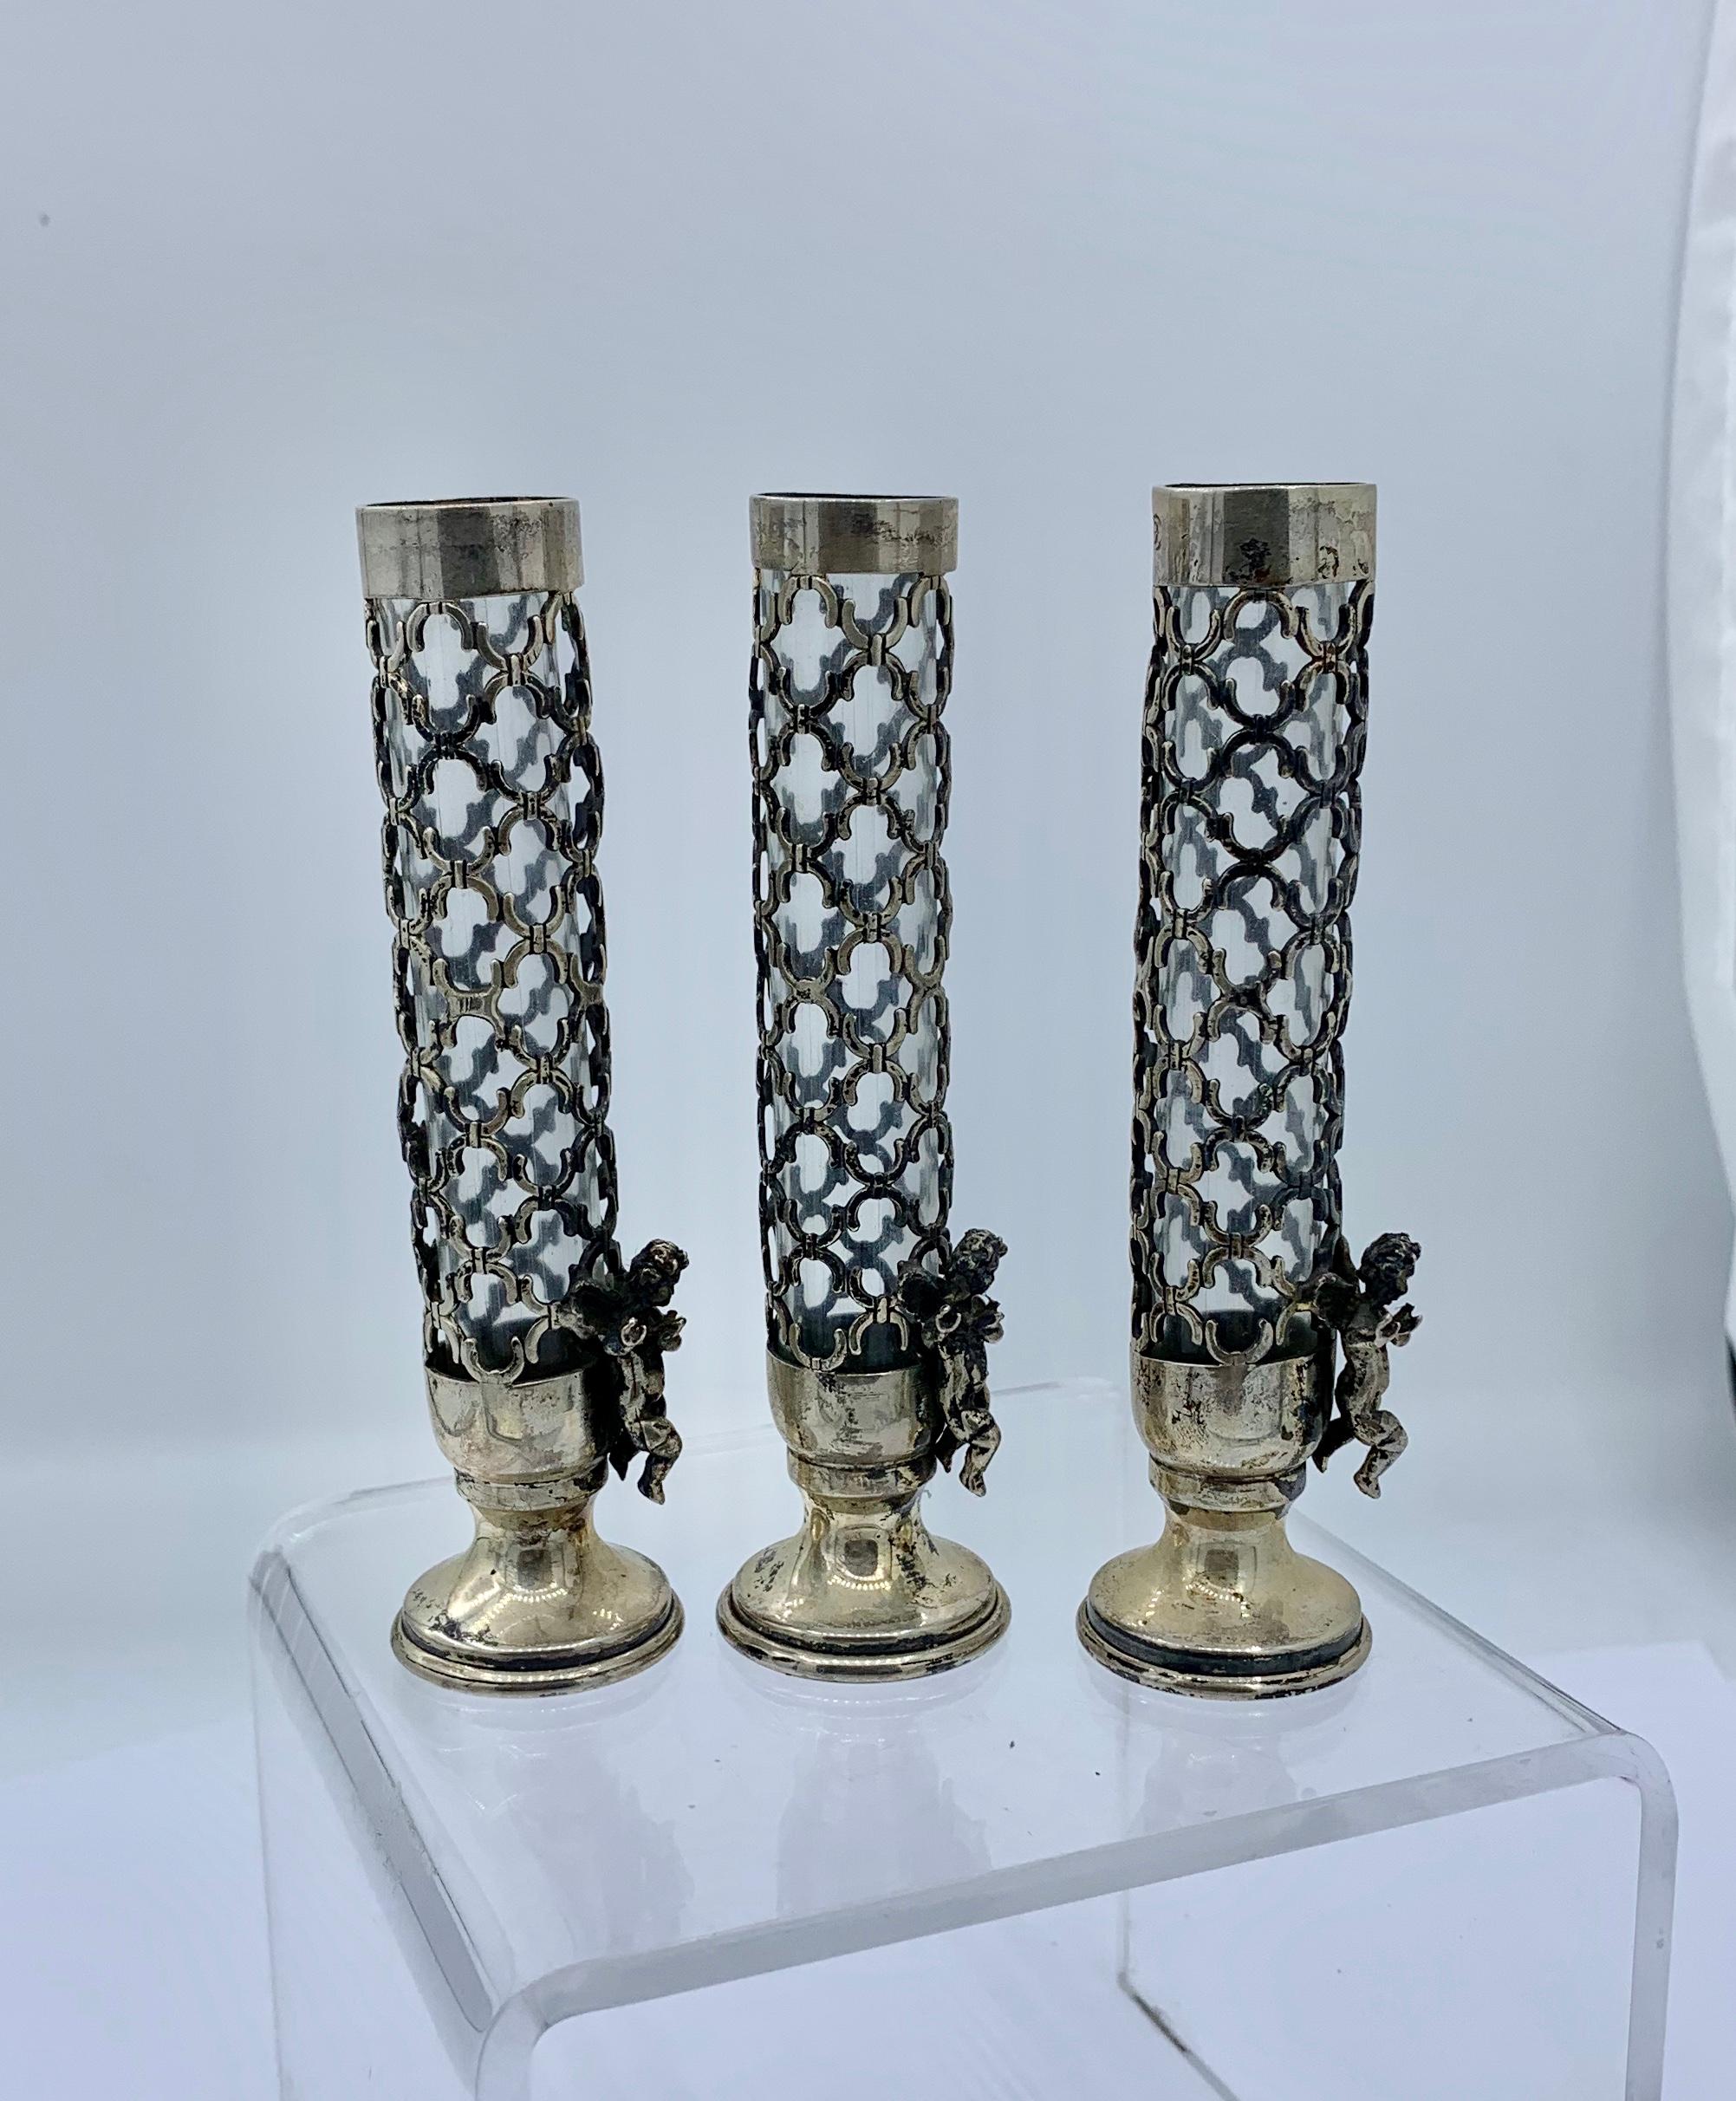 THIS IS A WONDERFUL SET OF THREE VICTORIAN - BELLE EPOQUE SILVER FLOWER BUD VASES ADORNED WITH GORGEOUS WINGED FLYING CHERUB, ANGEL OR CUPID PUTTI.
The vases are silver and have a lattice open work design.  Each vase has a flying angel towards the